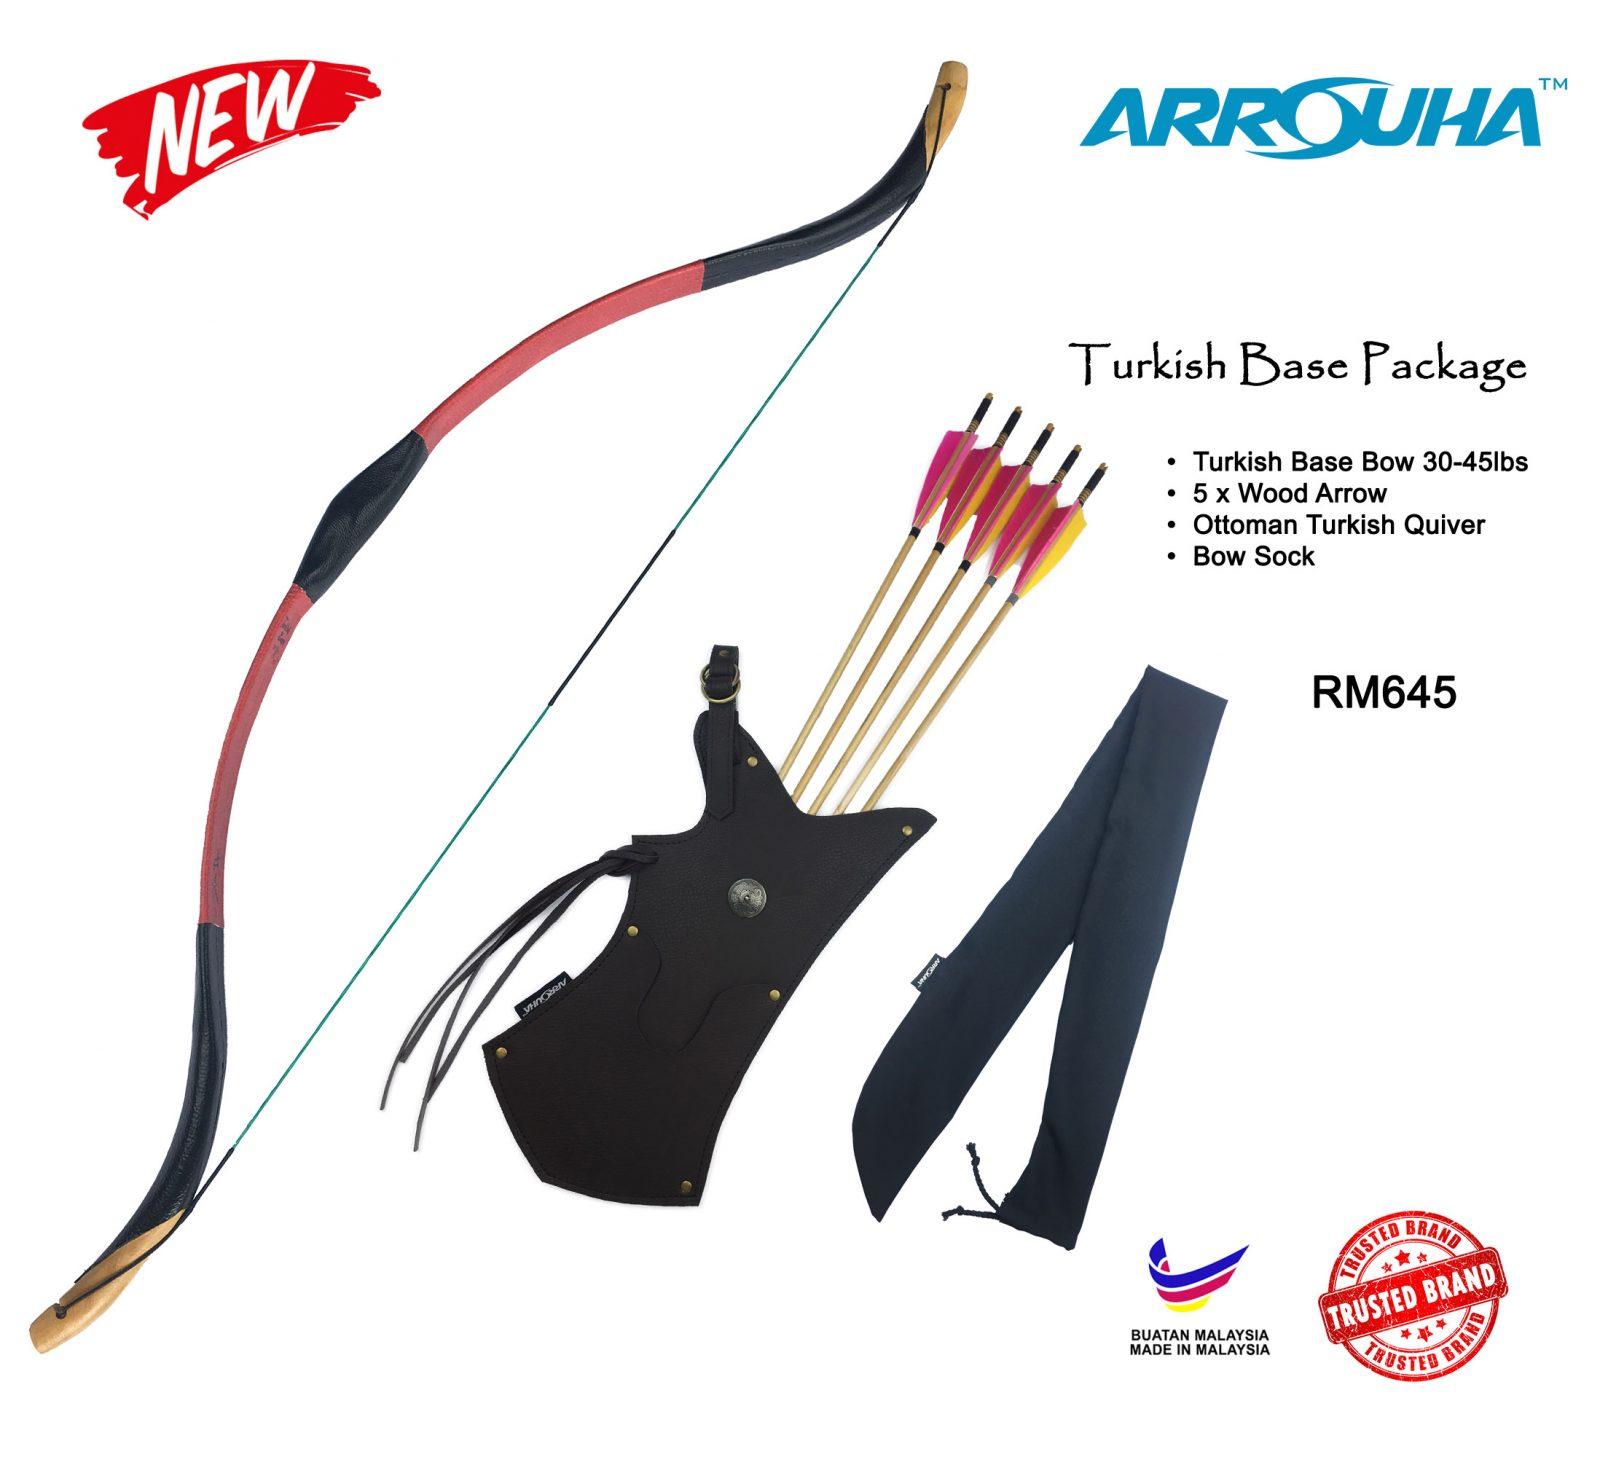 Turkish Base package RM645 with price